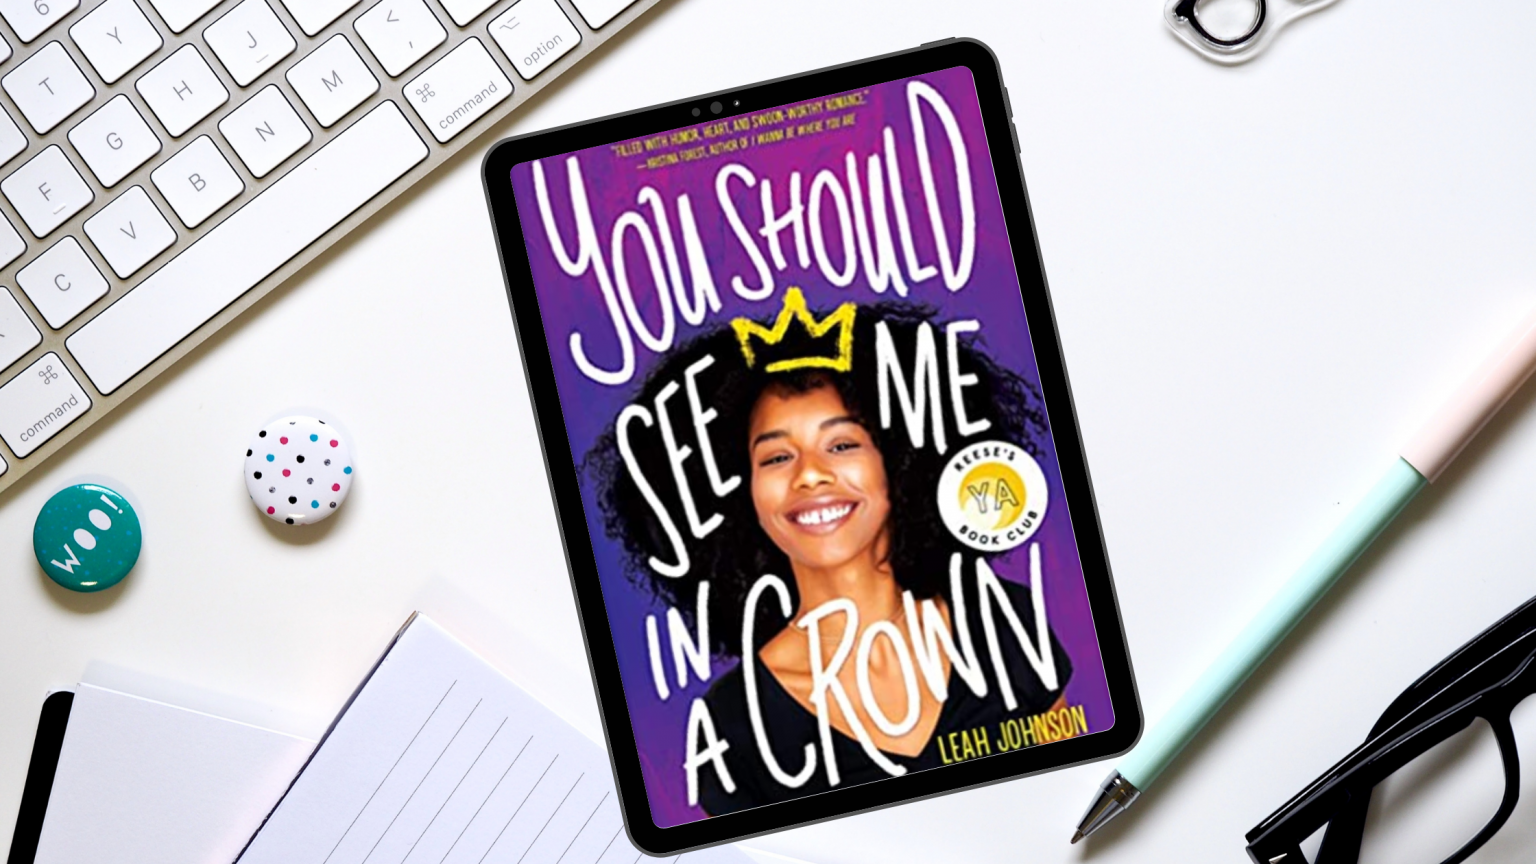 you should see me in a crown book cover